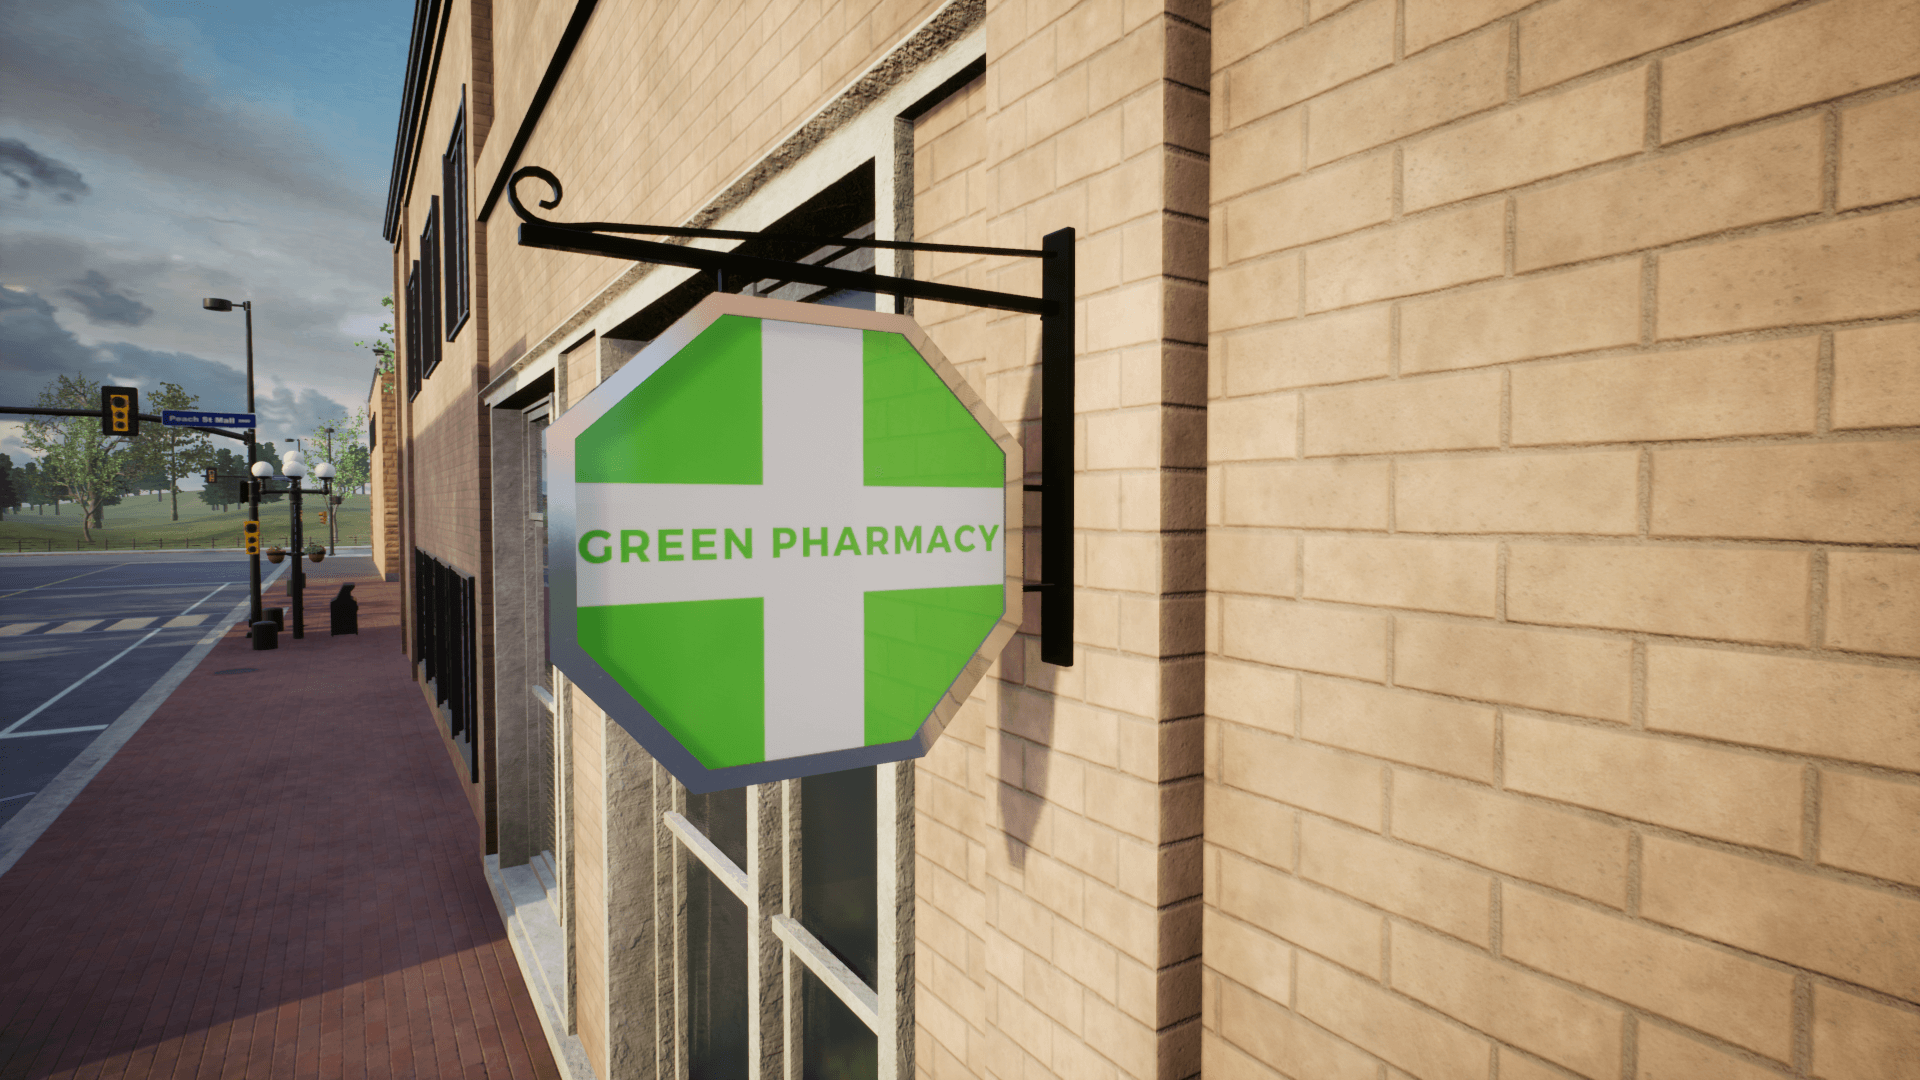 An image showing Shop Signboards asset pack, created with Unreal Engine.